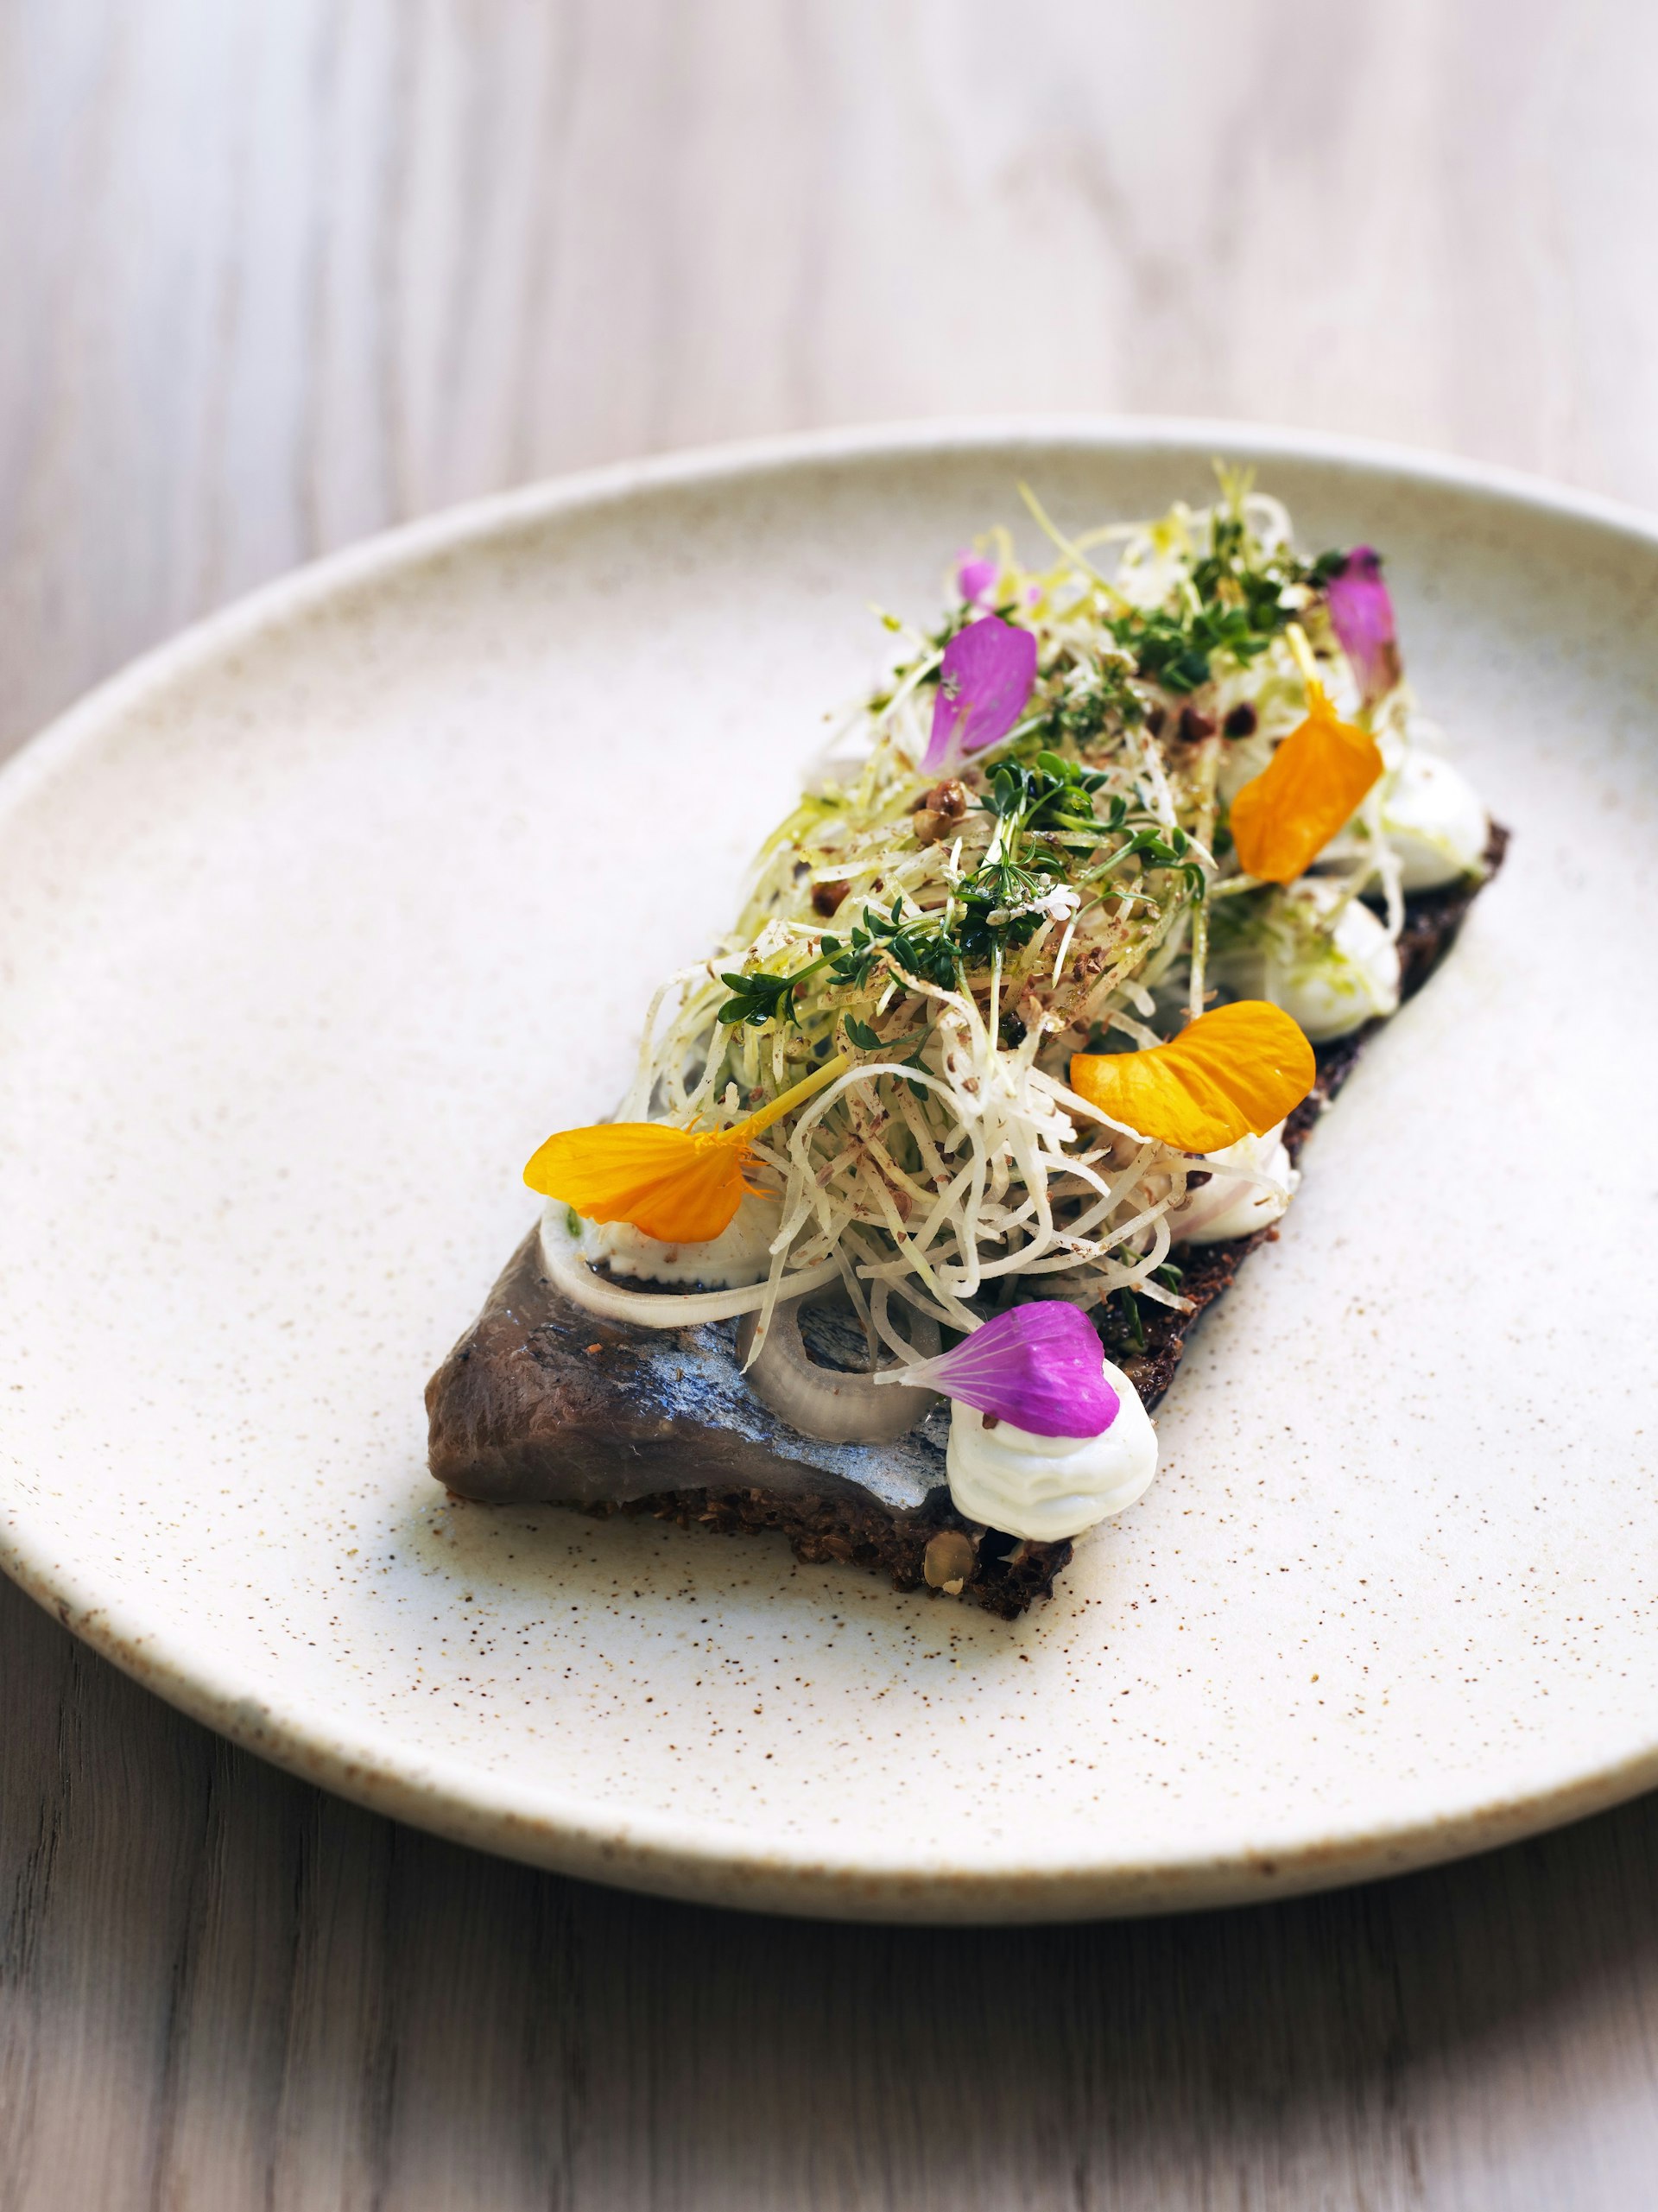 An open sandwich with herring, topped with orange and purple flowers